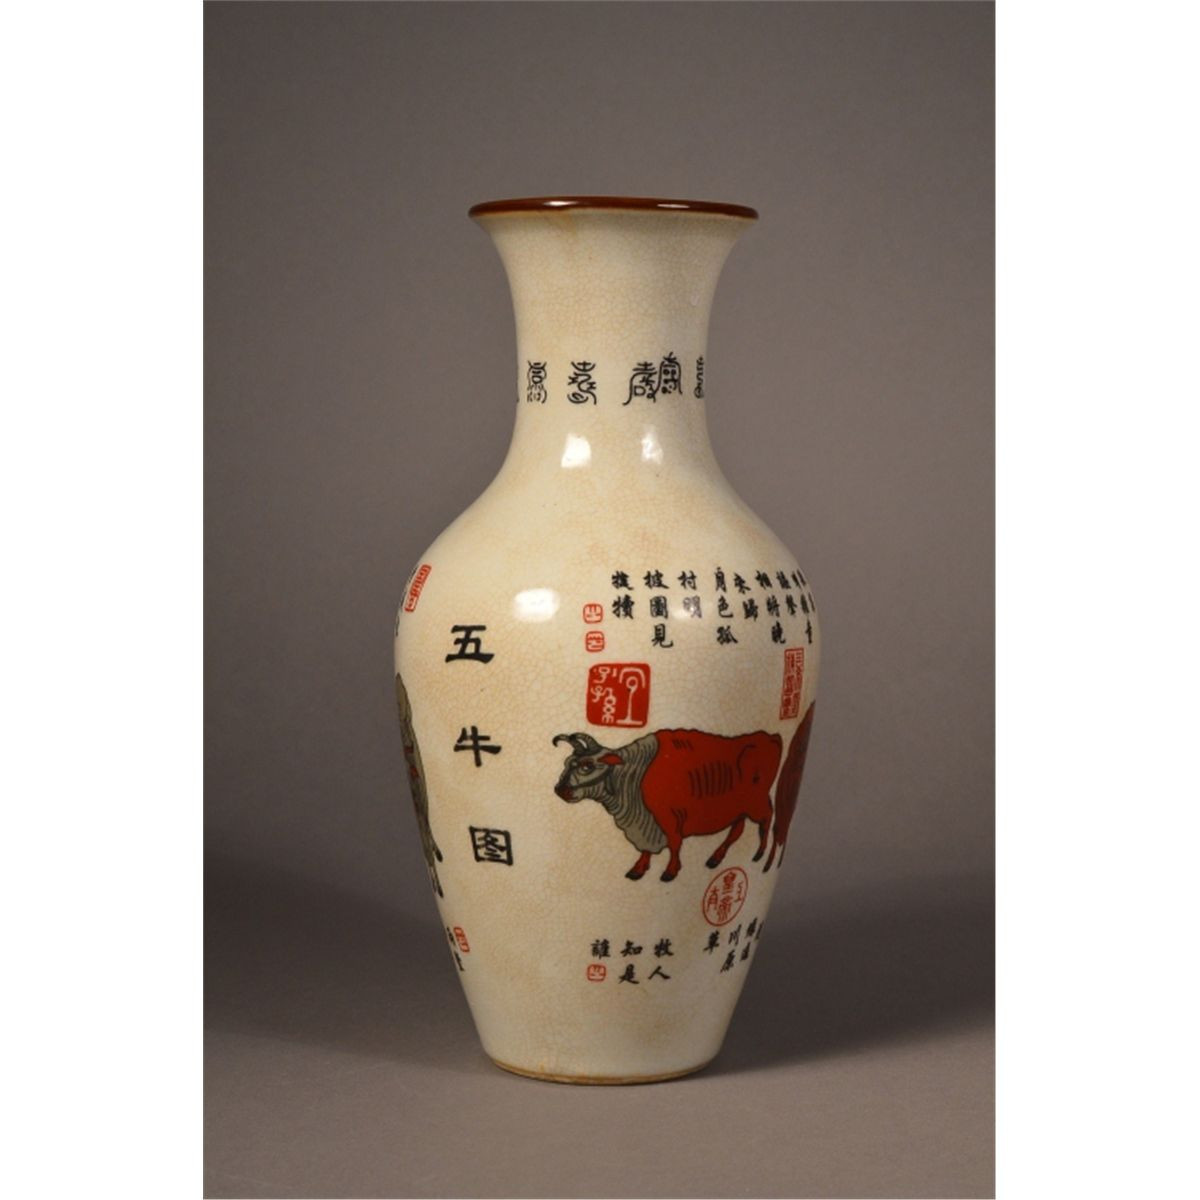 16 Perfect Antique Chinese Vases for Sale 2022 free download antique chinese vases for sale of chinese porcelain vase iron red qianlong mark regarding 11258378 3